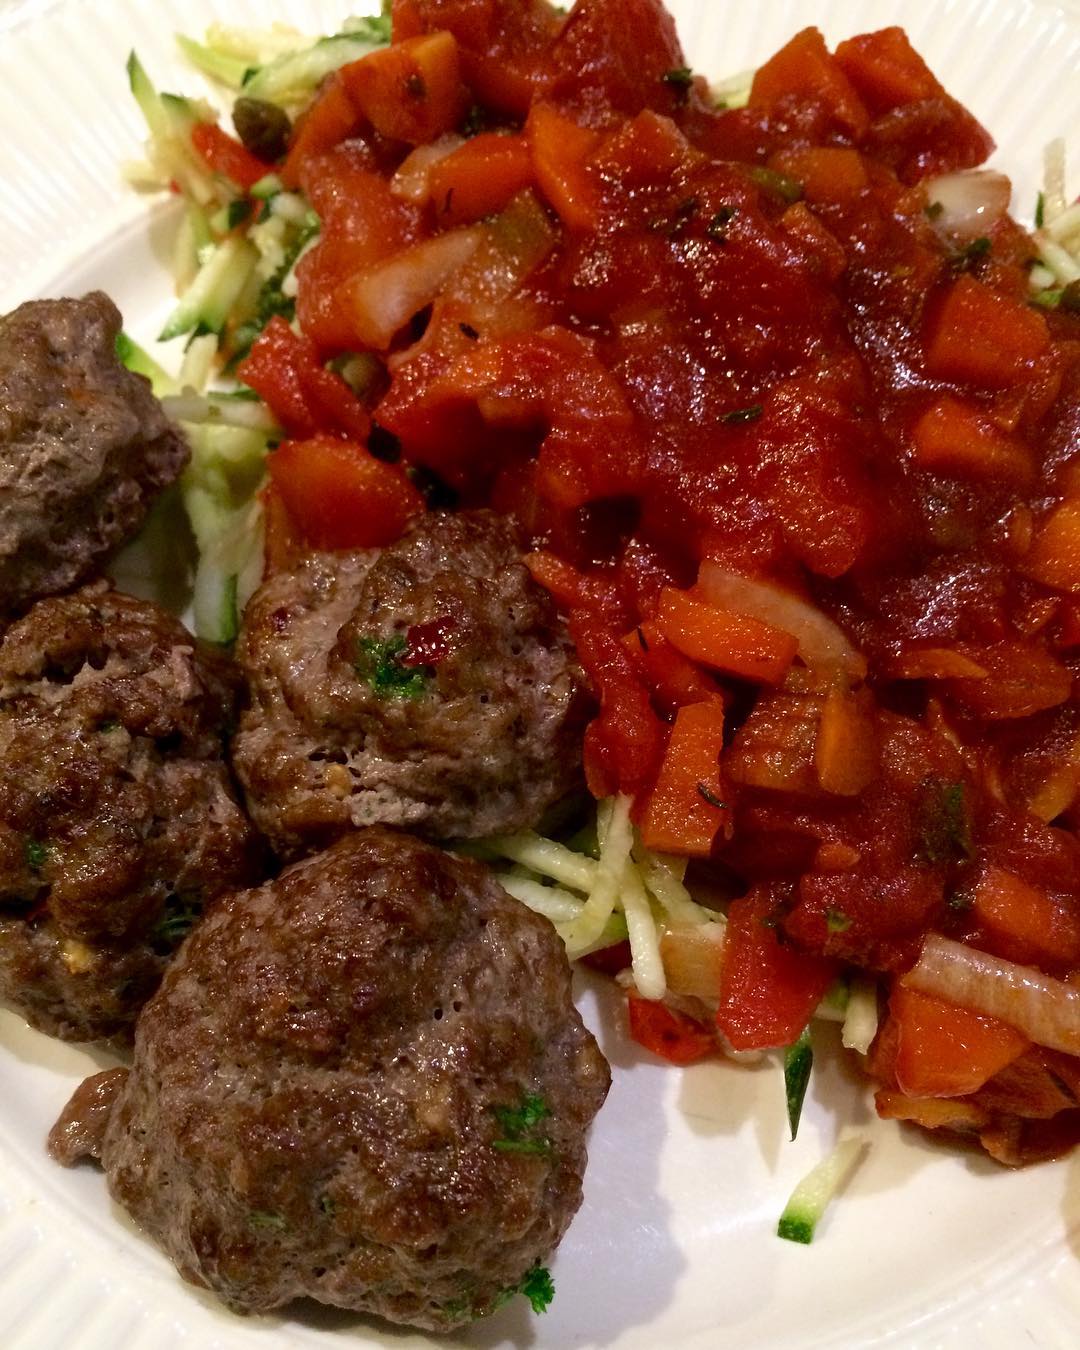 Cheesy Zucchini Noodles with Homemade Marinara and Meatballs